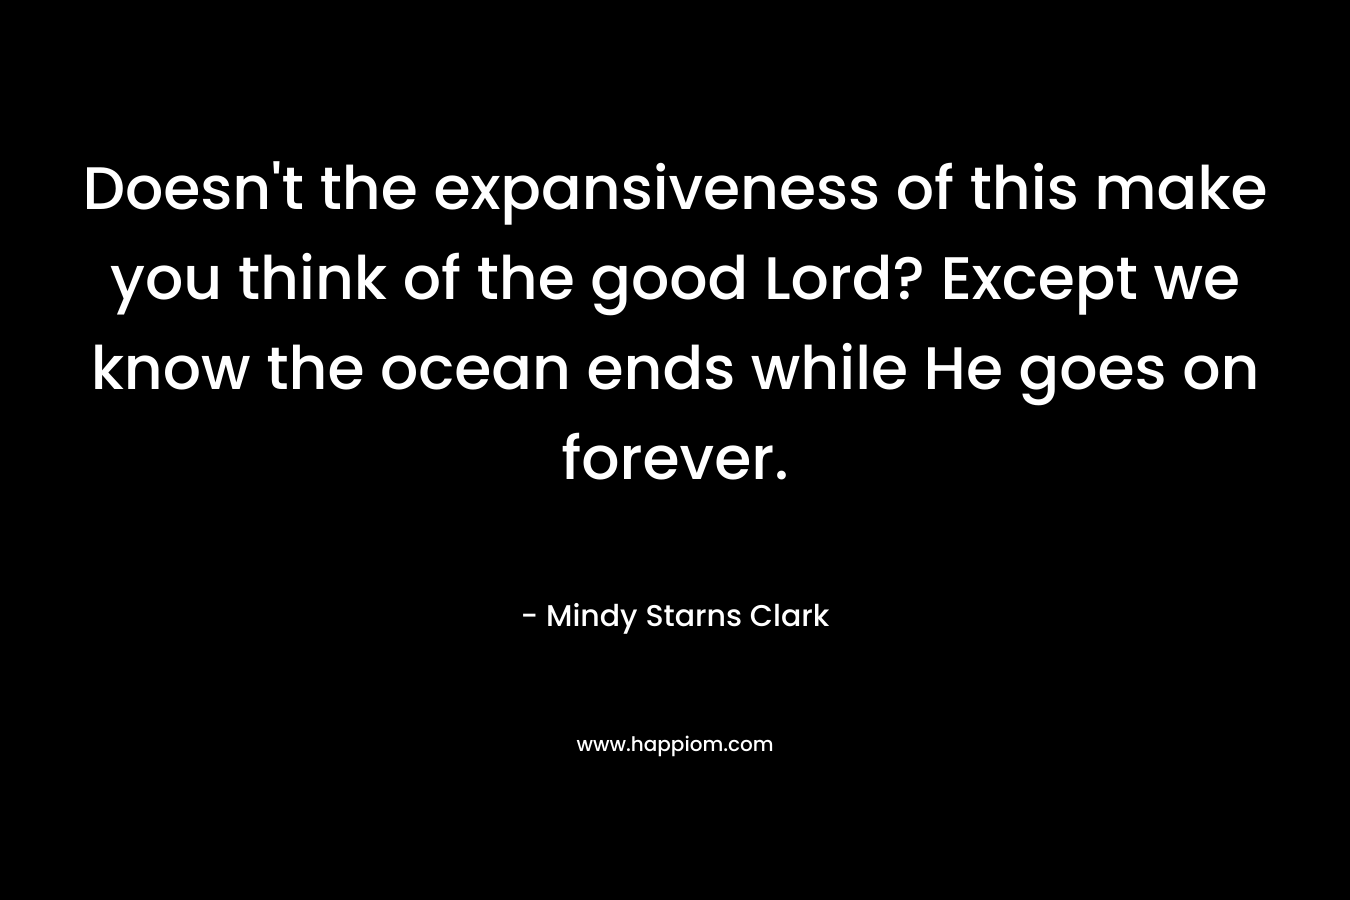 Doesn’t the expansiveness of this make you think of the good Lord? Except we know the ocean ends while He goes on forever. – Mindy Starns Clark